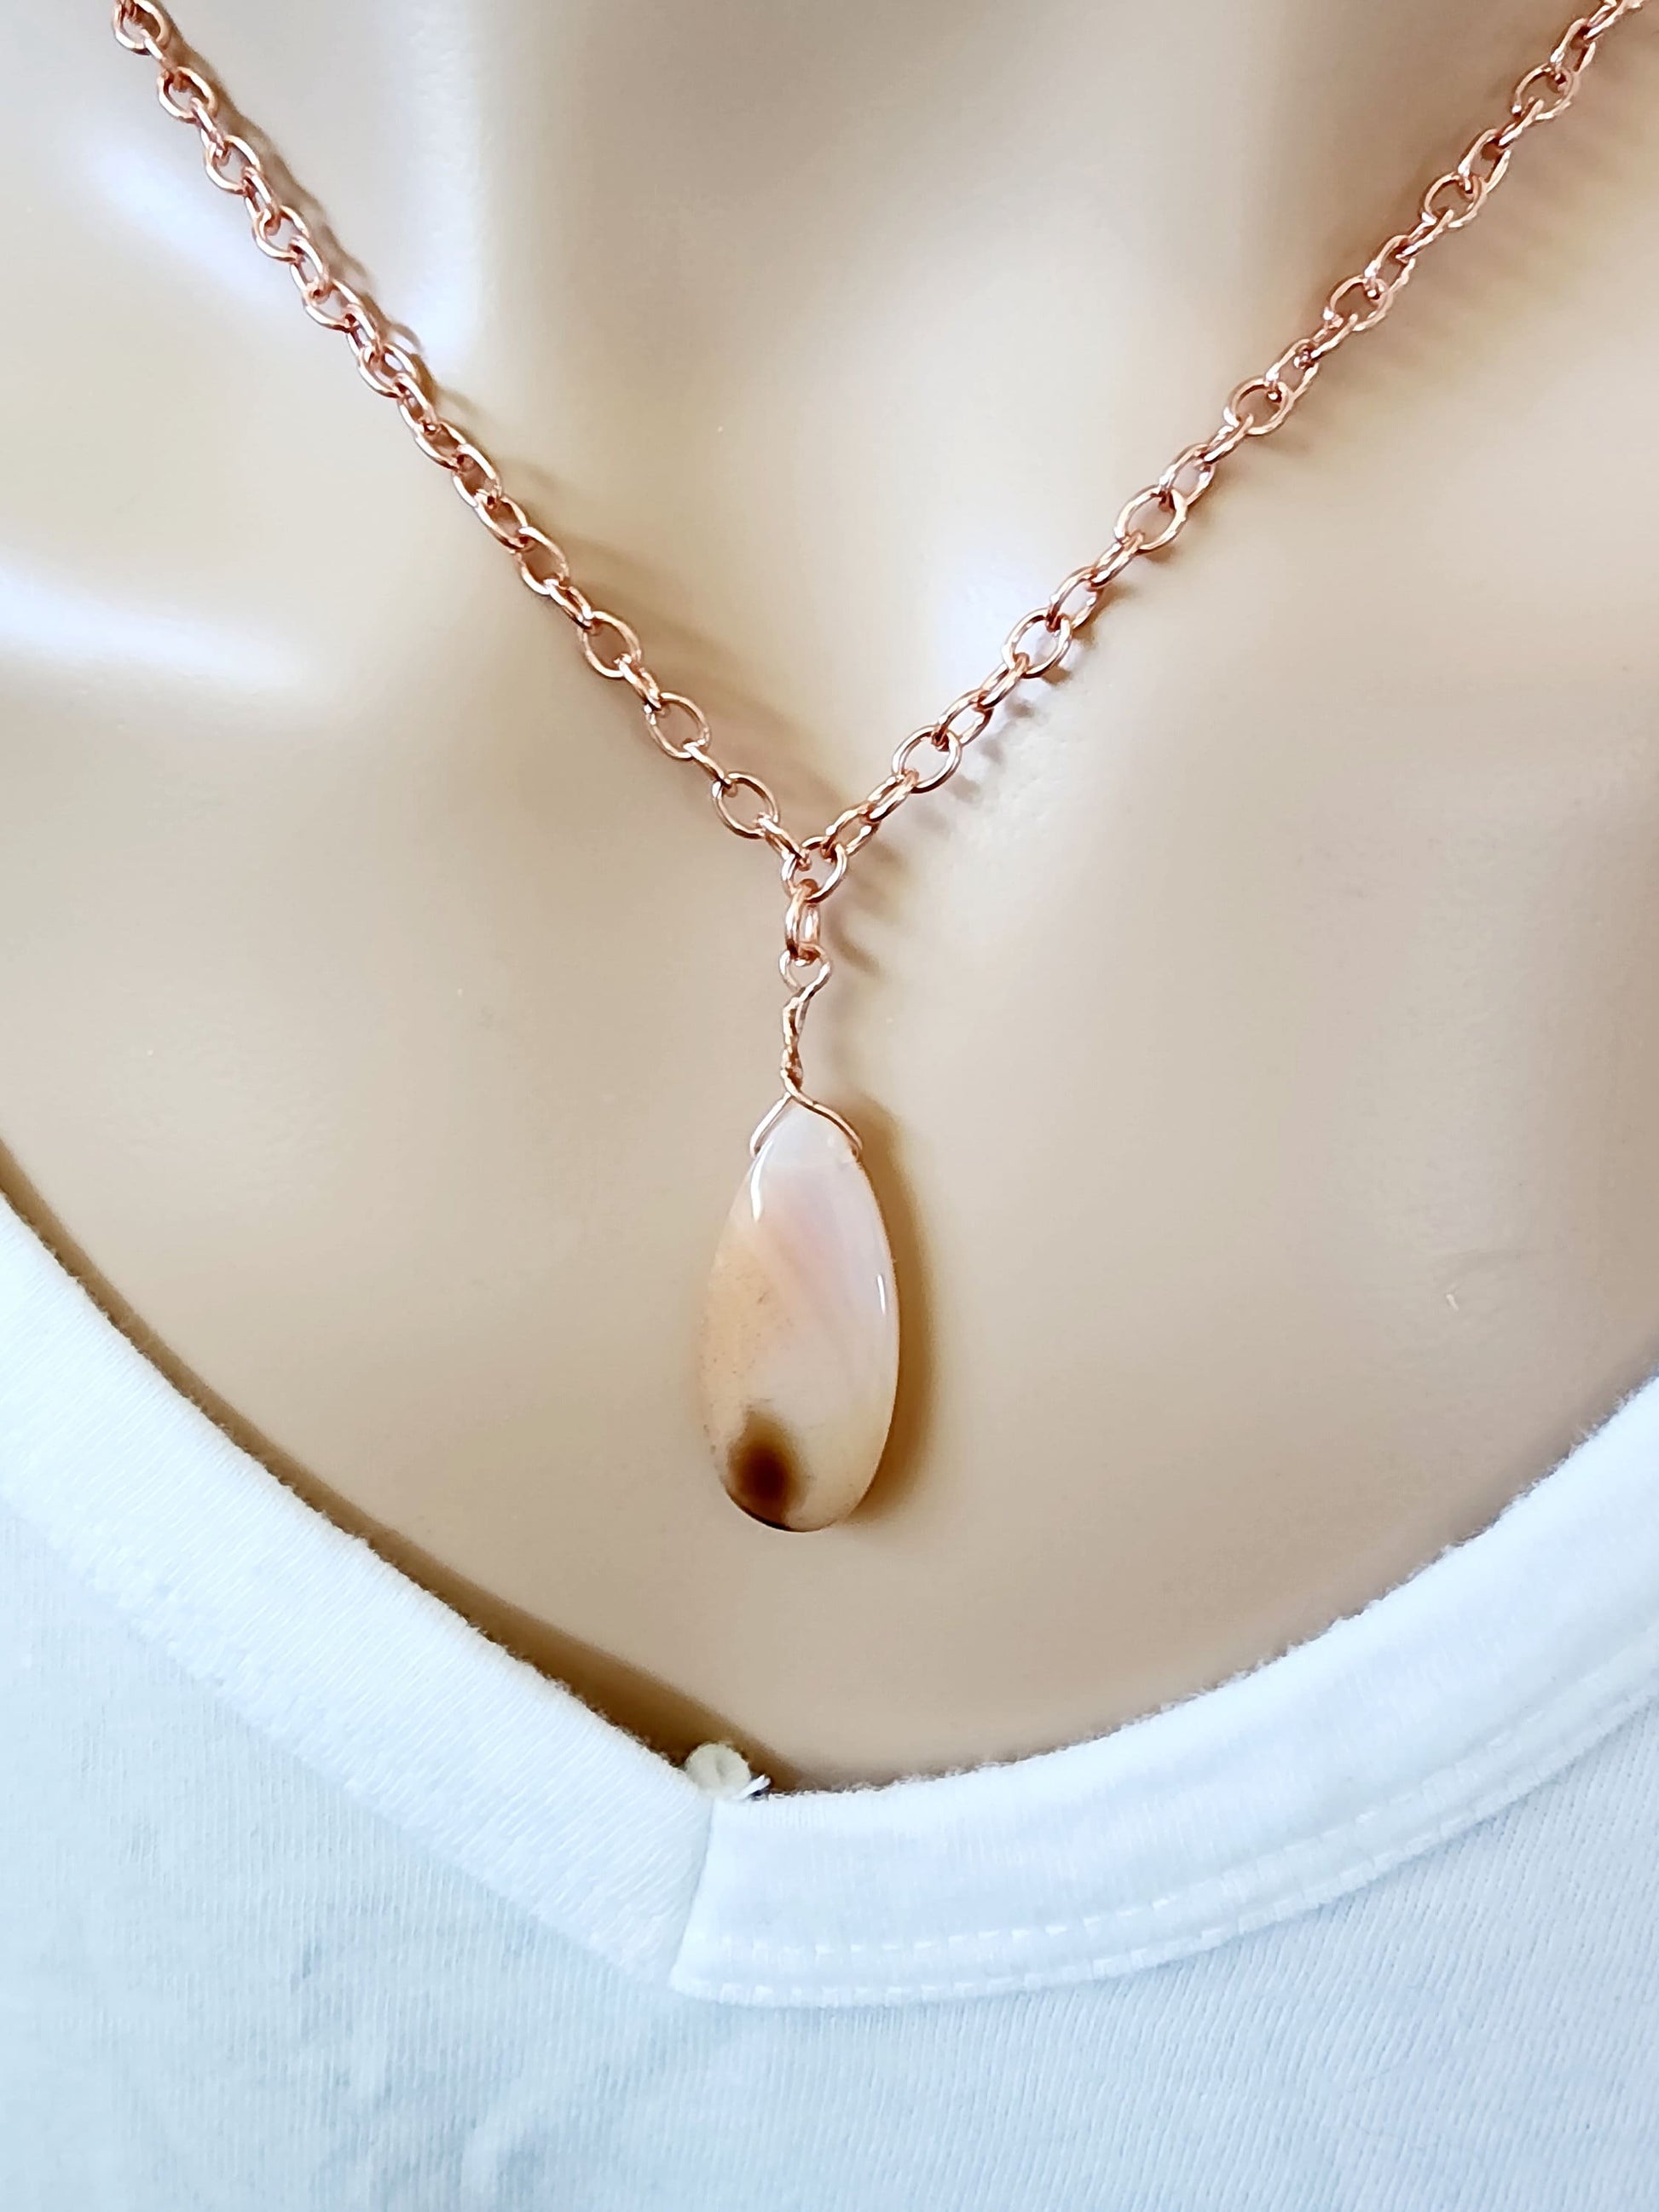 Peach Selenite Tear Drop Necklace, Natural Stone Necklace